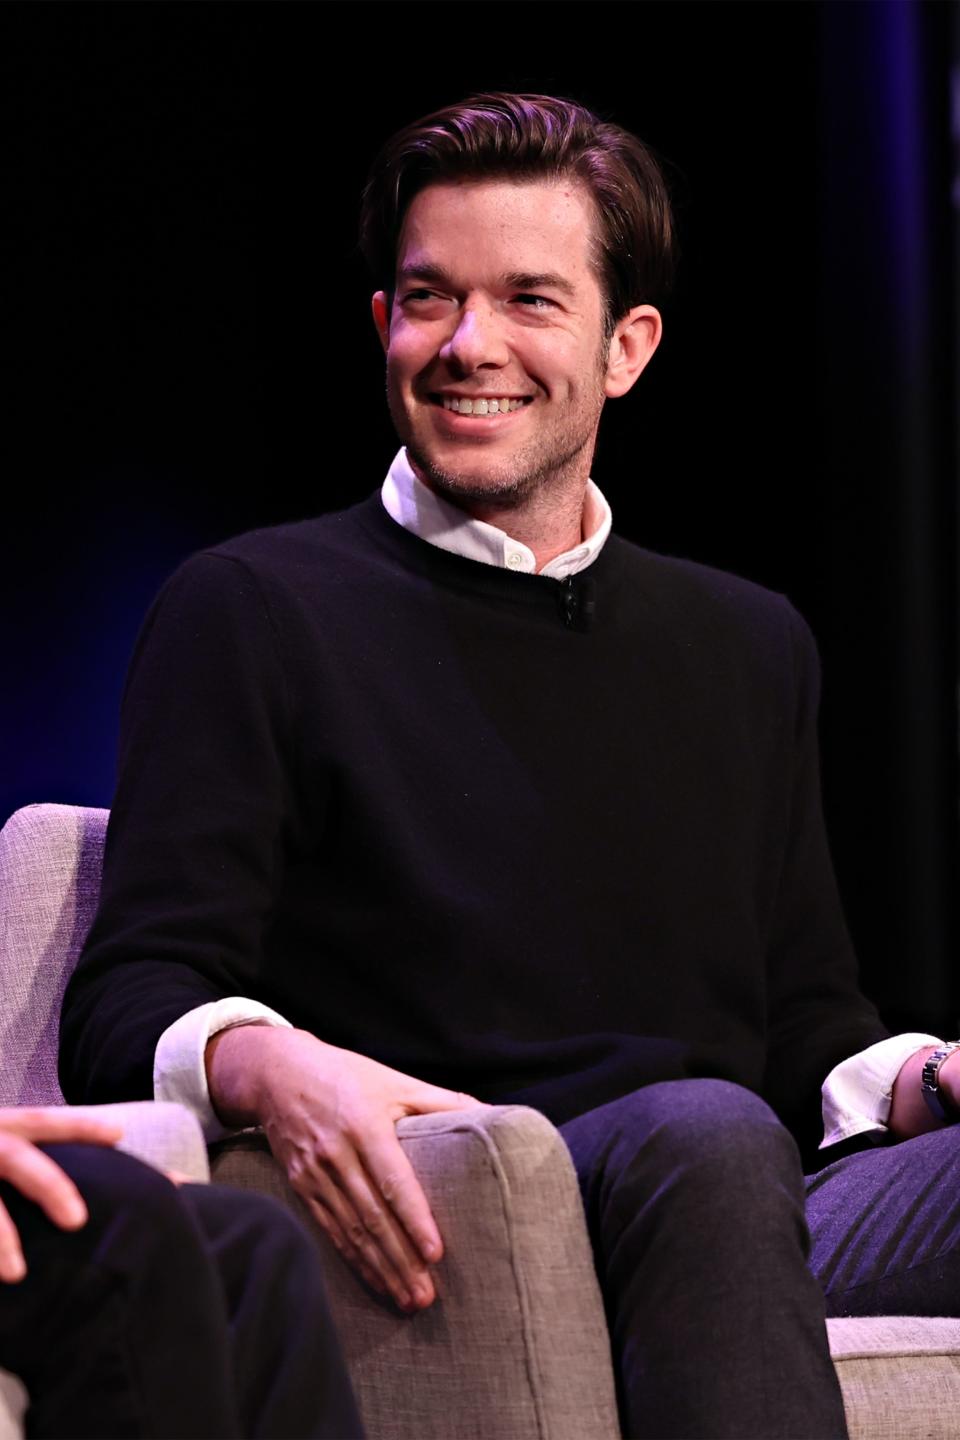 NEW YORK, NEW YORK - MAY 31: John Mulaney speaks onstage during 'John Mulaney in Conversation with Fred Armisen' at 92NY on May 31, 2023 in New York City. (Photo by Cindy Ord/Getty Images) ORG XMIT: 775983547 ORIG FILE ID: 1494990224